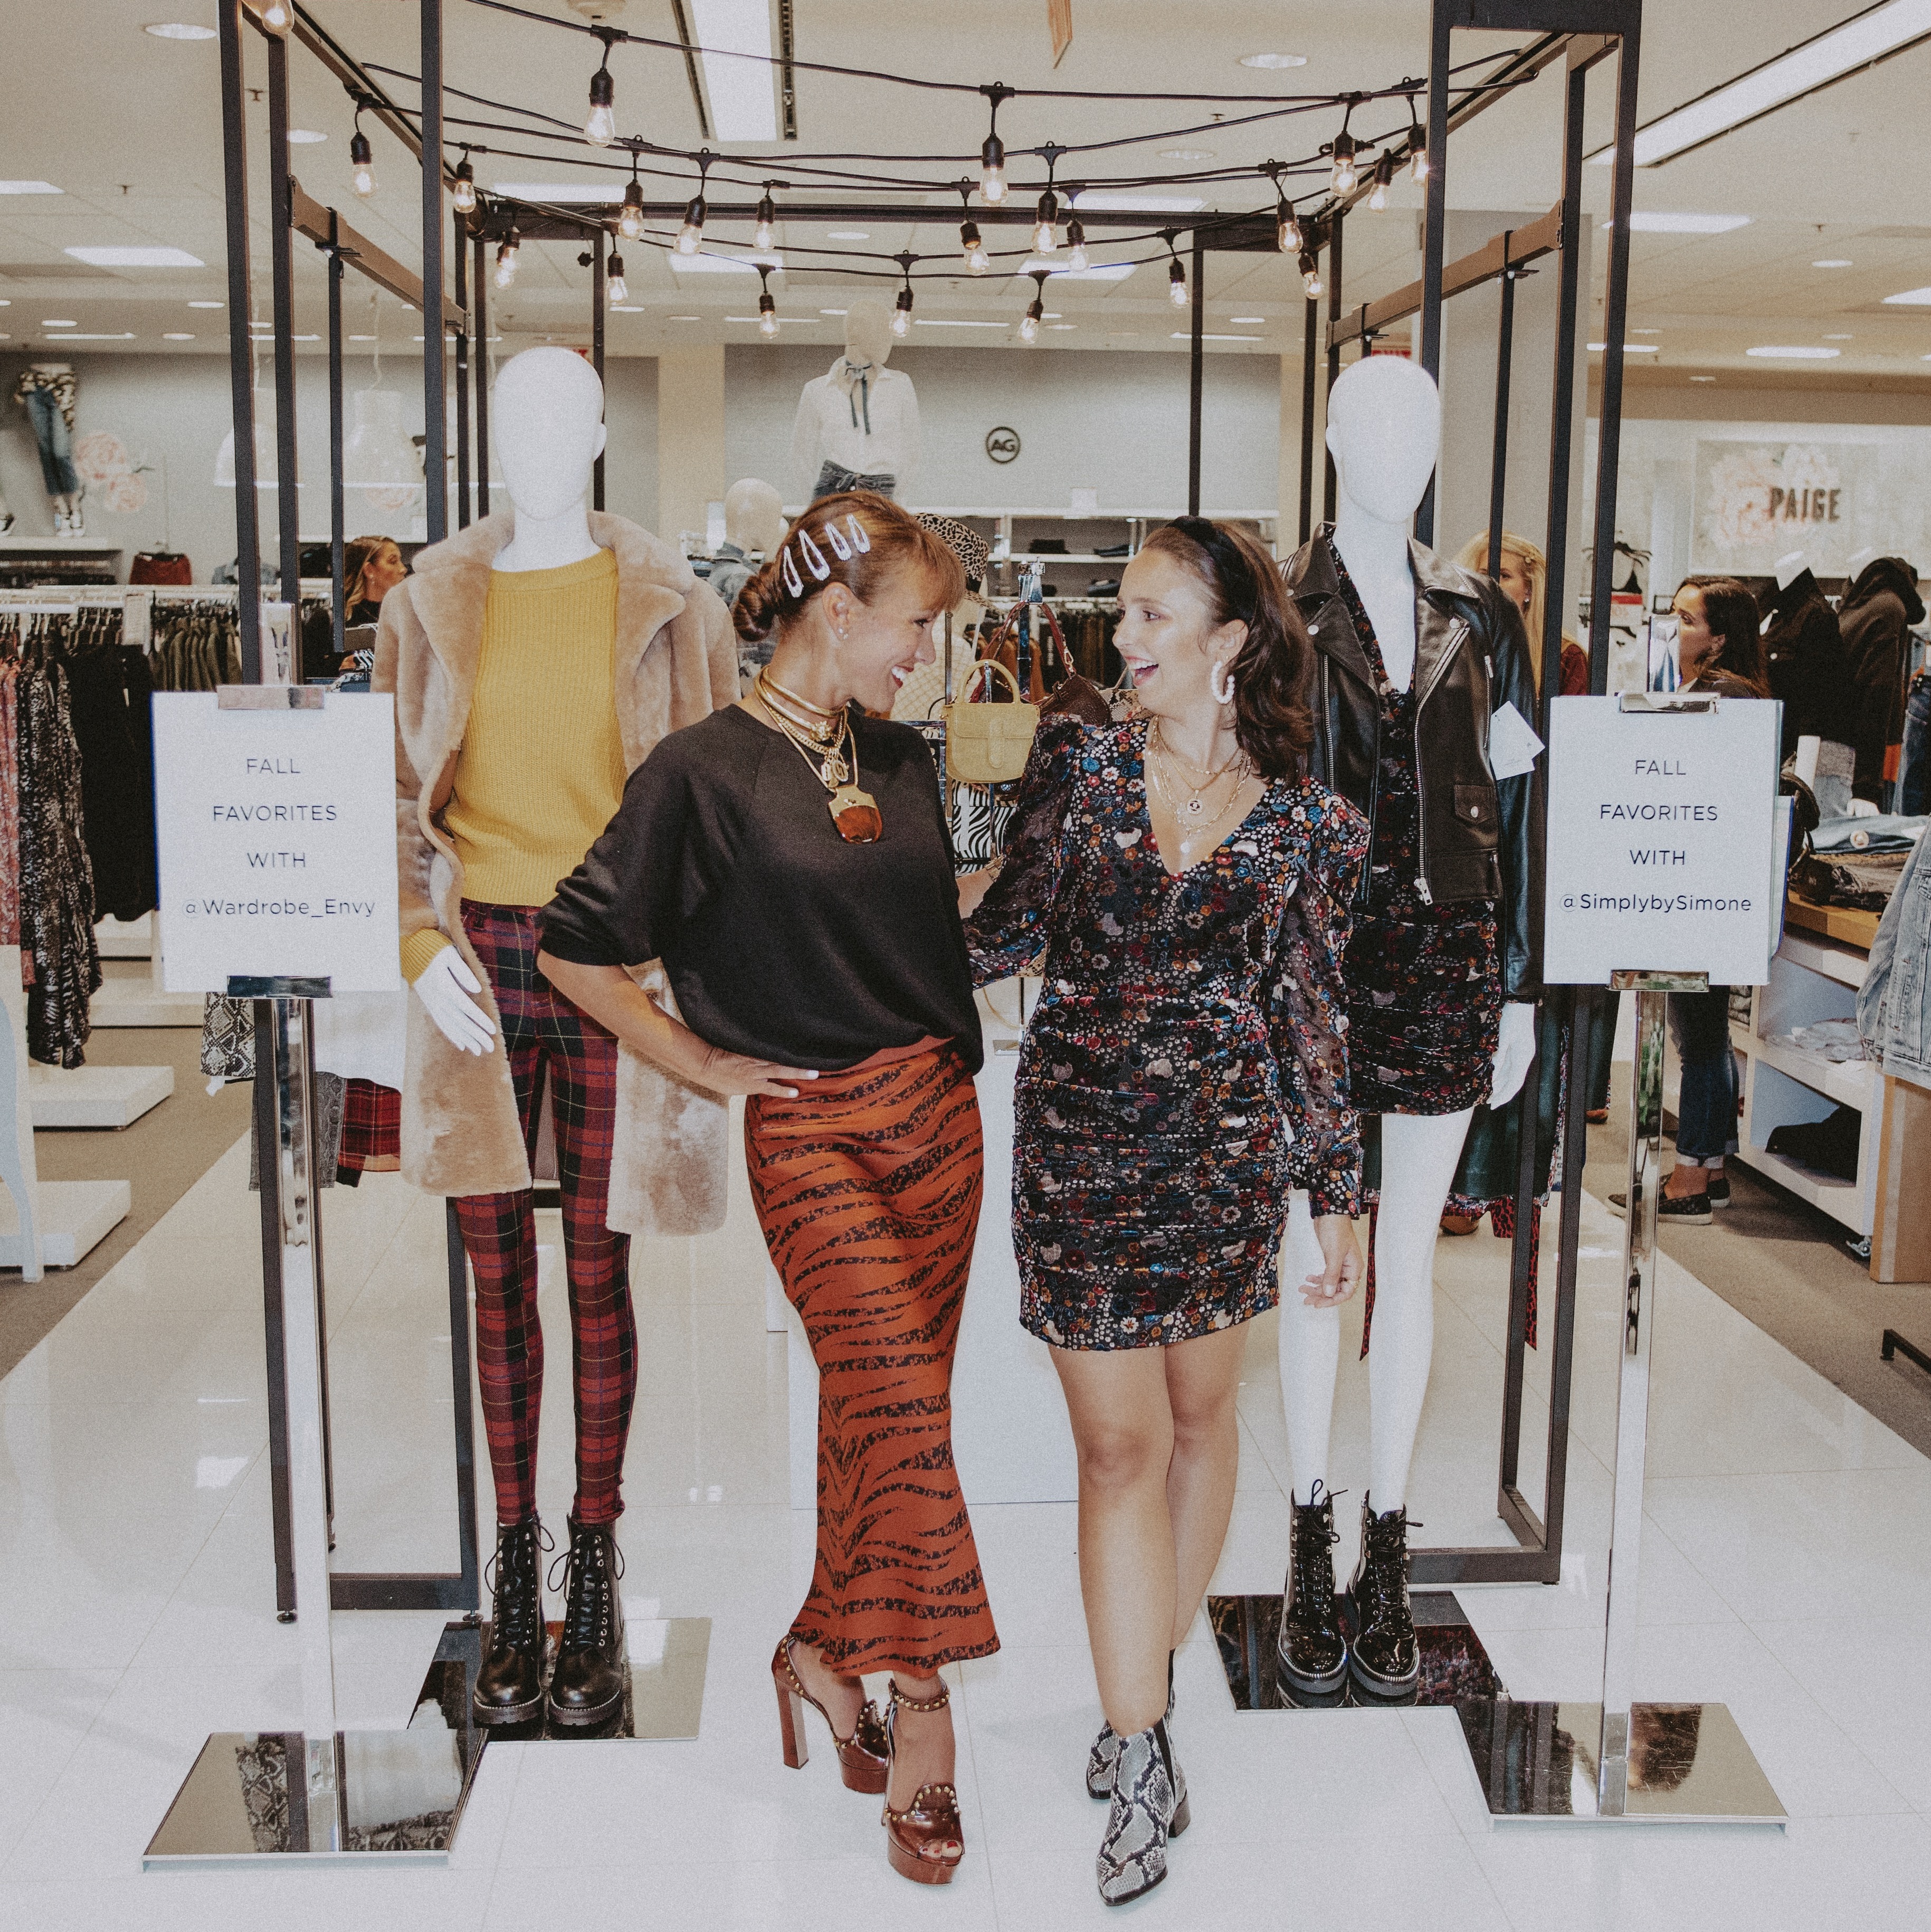 Simone Piliero - Wardrobe Envy - Tina - In Store Shop - Hosts NYFW in Westchester County at Bloomingdales White Plains Season 3 #nyfw #bloomingdales #westchestercounty #newyork #fallfashion #falloutfit #fallstyle #fashionshow #runway #runwayshow #event #bloggerstyle #fashion #outfit #style #styleinspiration